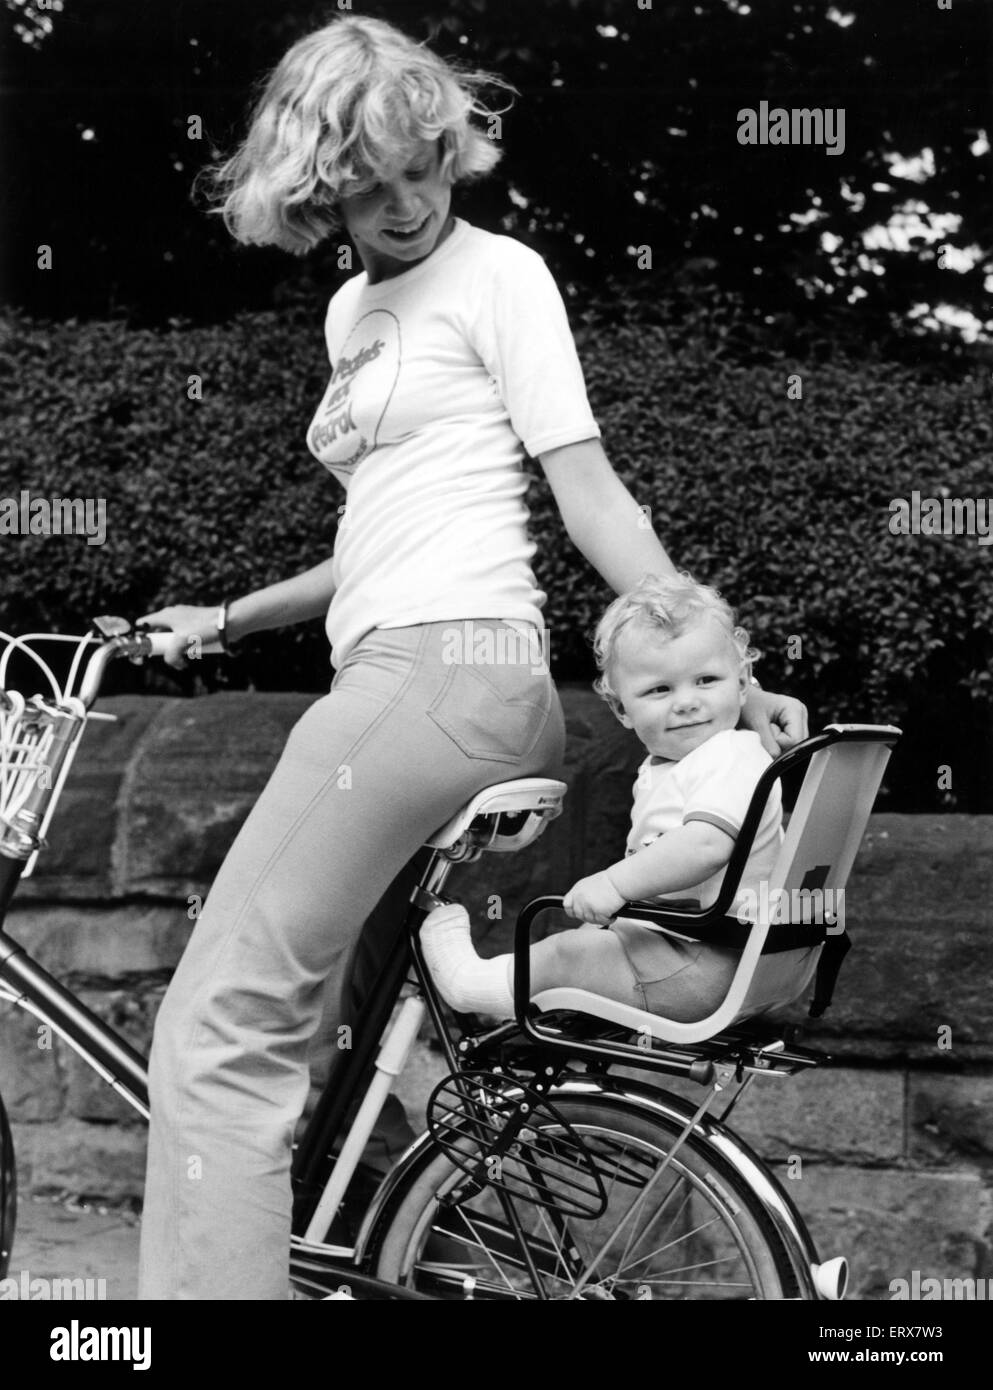 Mother and Child, Cycling. 30th June 1979. Stock Photo